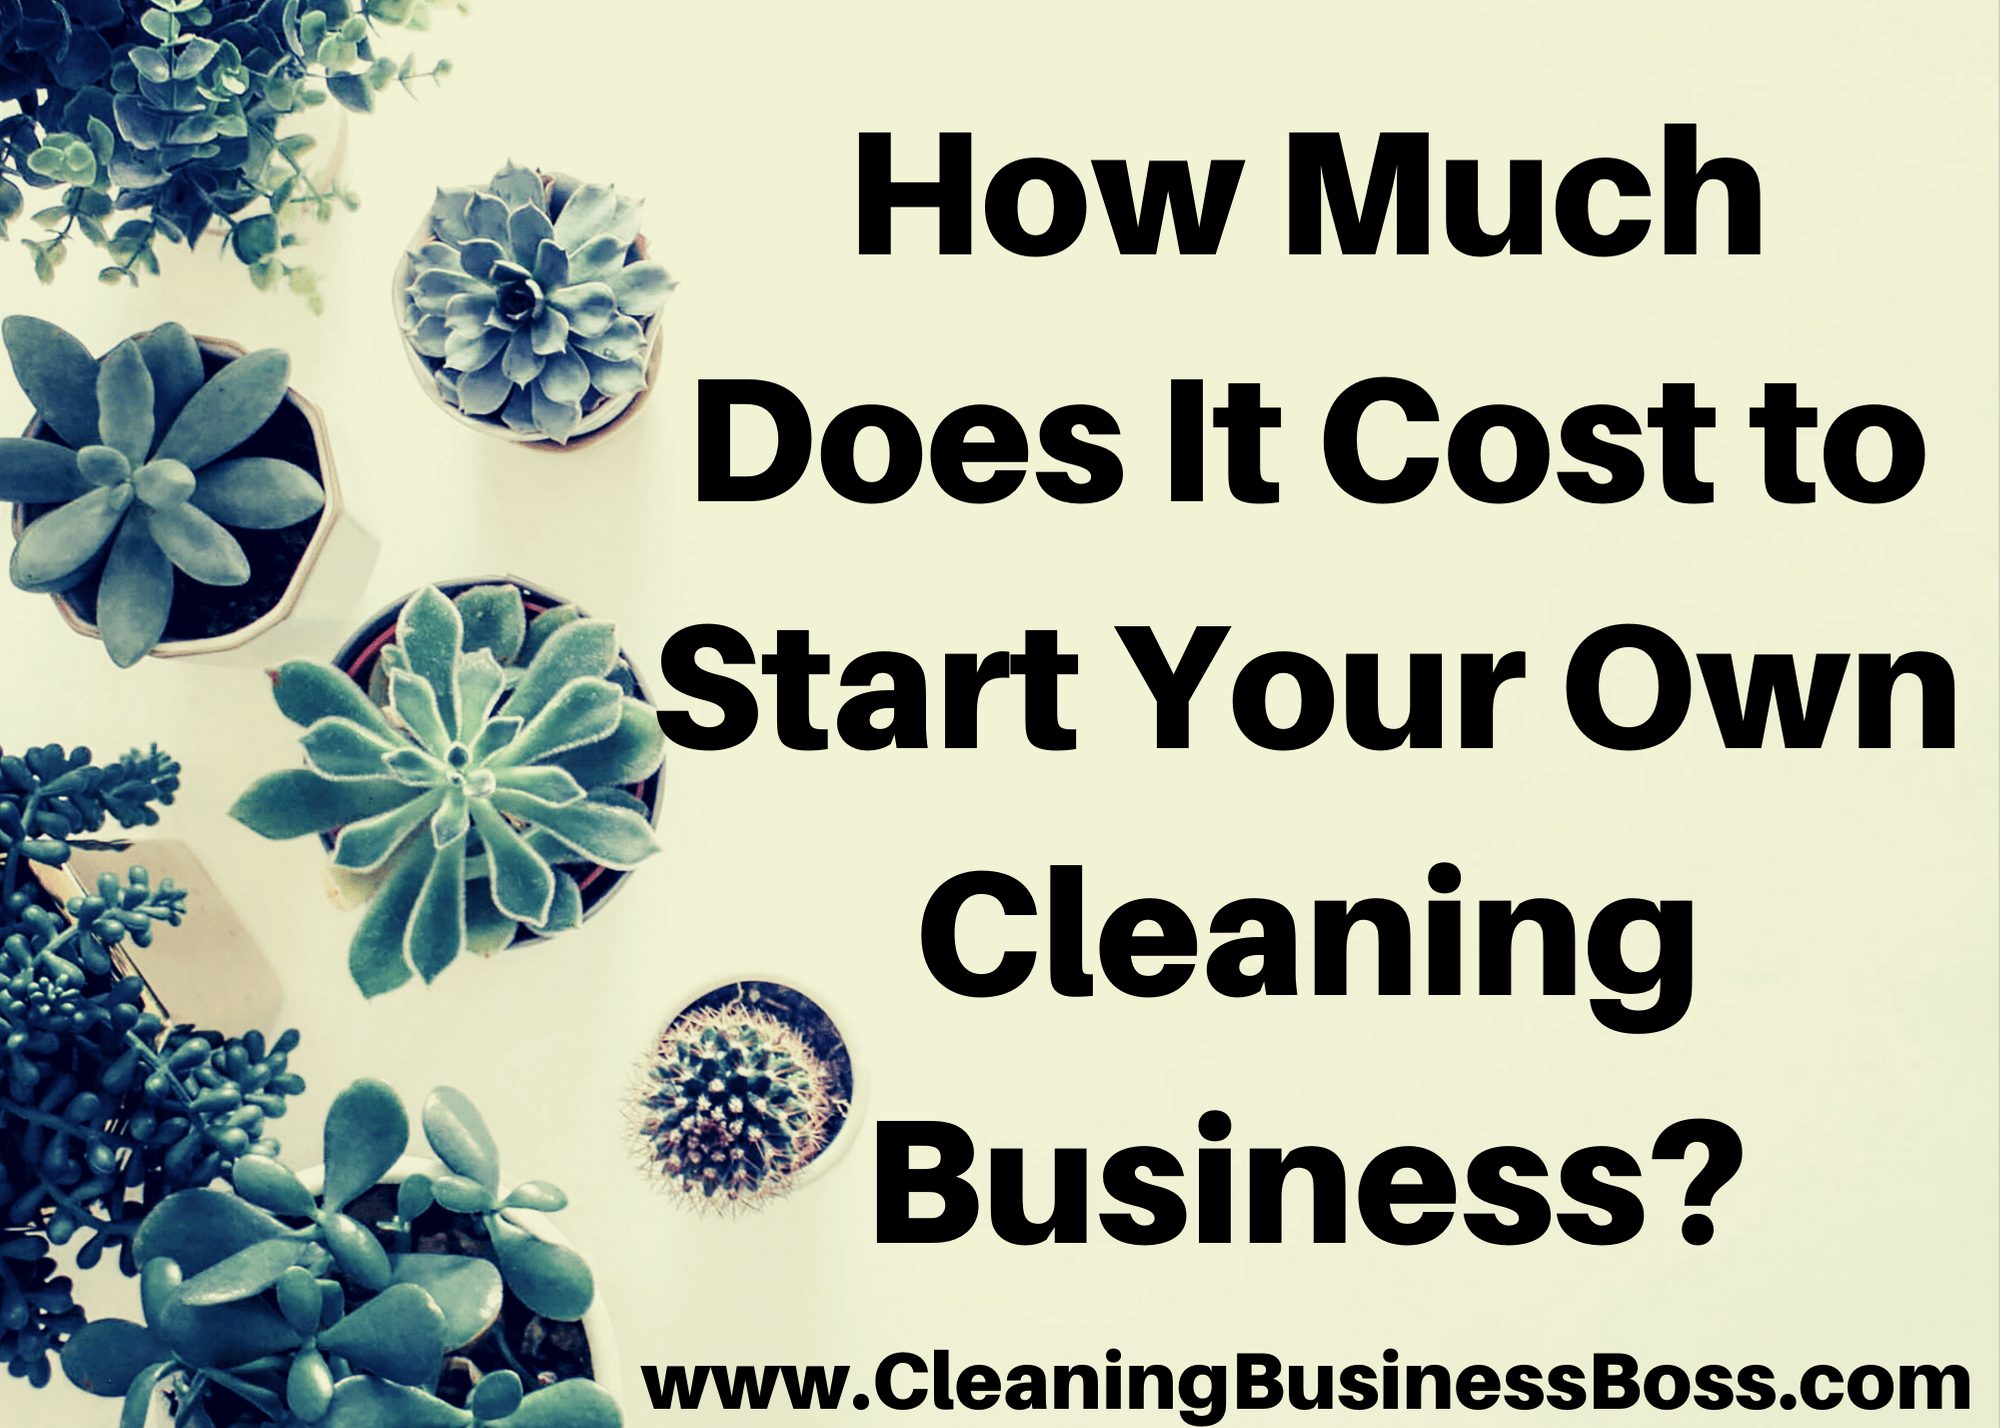 How Much Does It Cost to Start Your Own Cleaning Business?